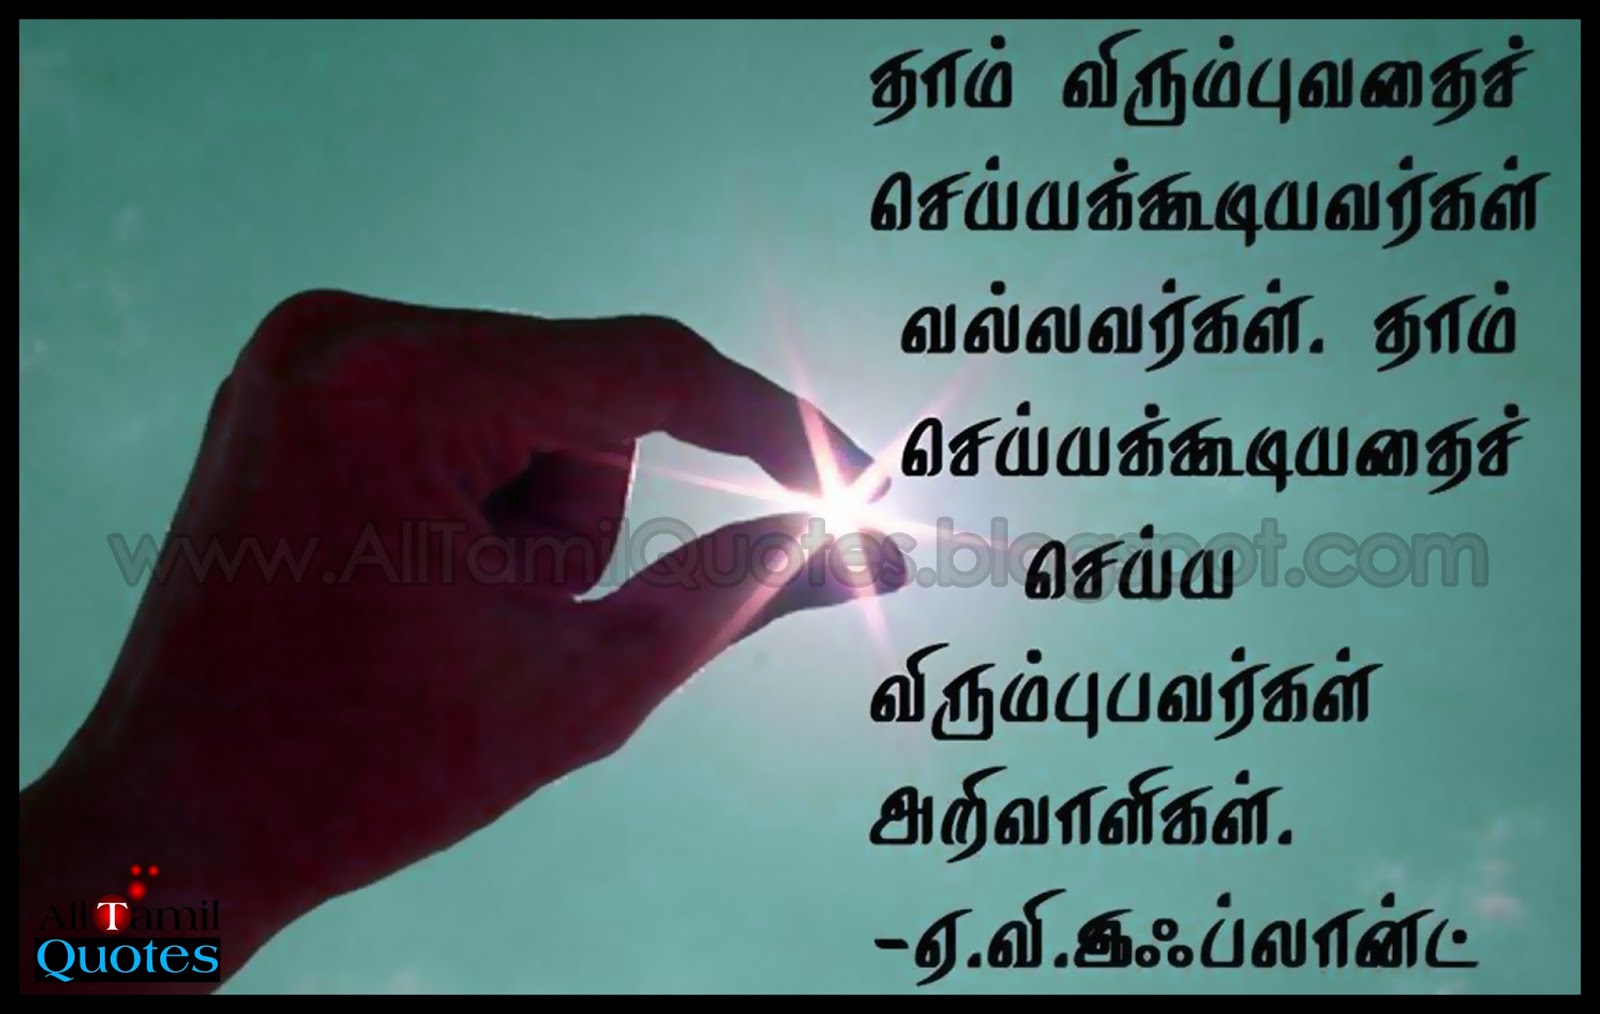 Tamil Facebook Kavithai and Images